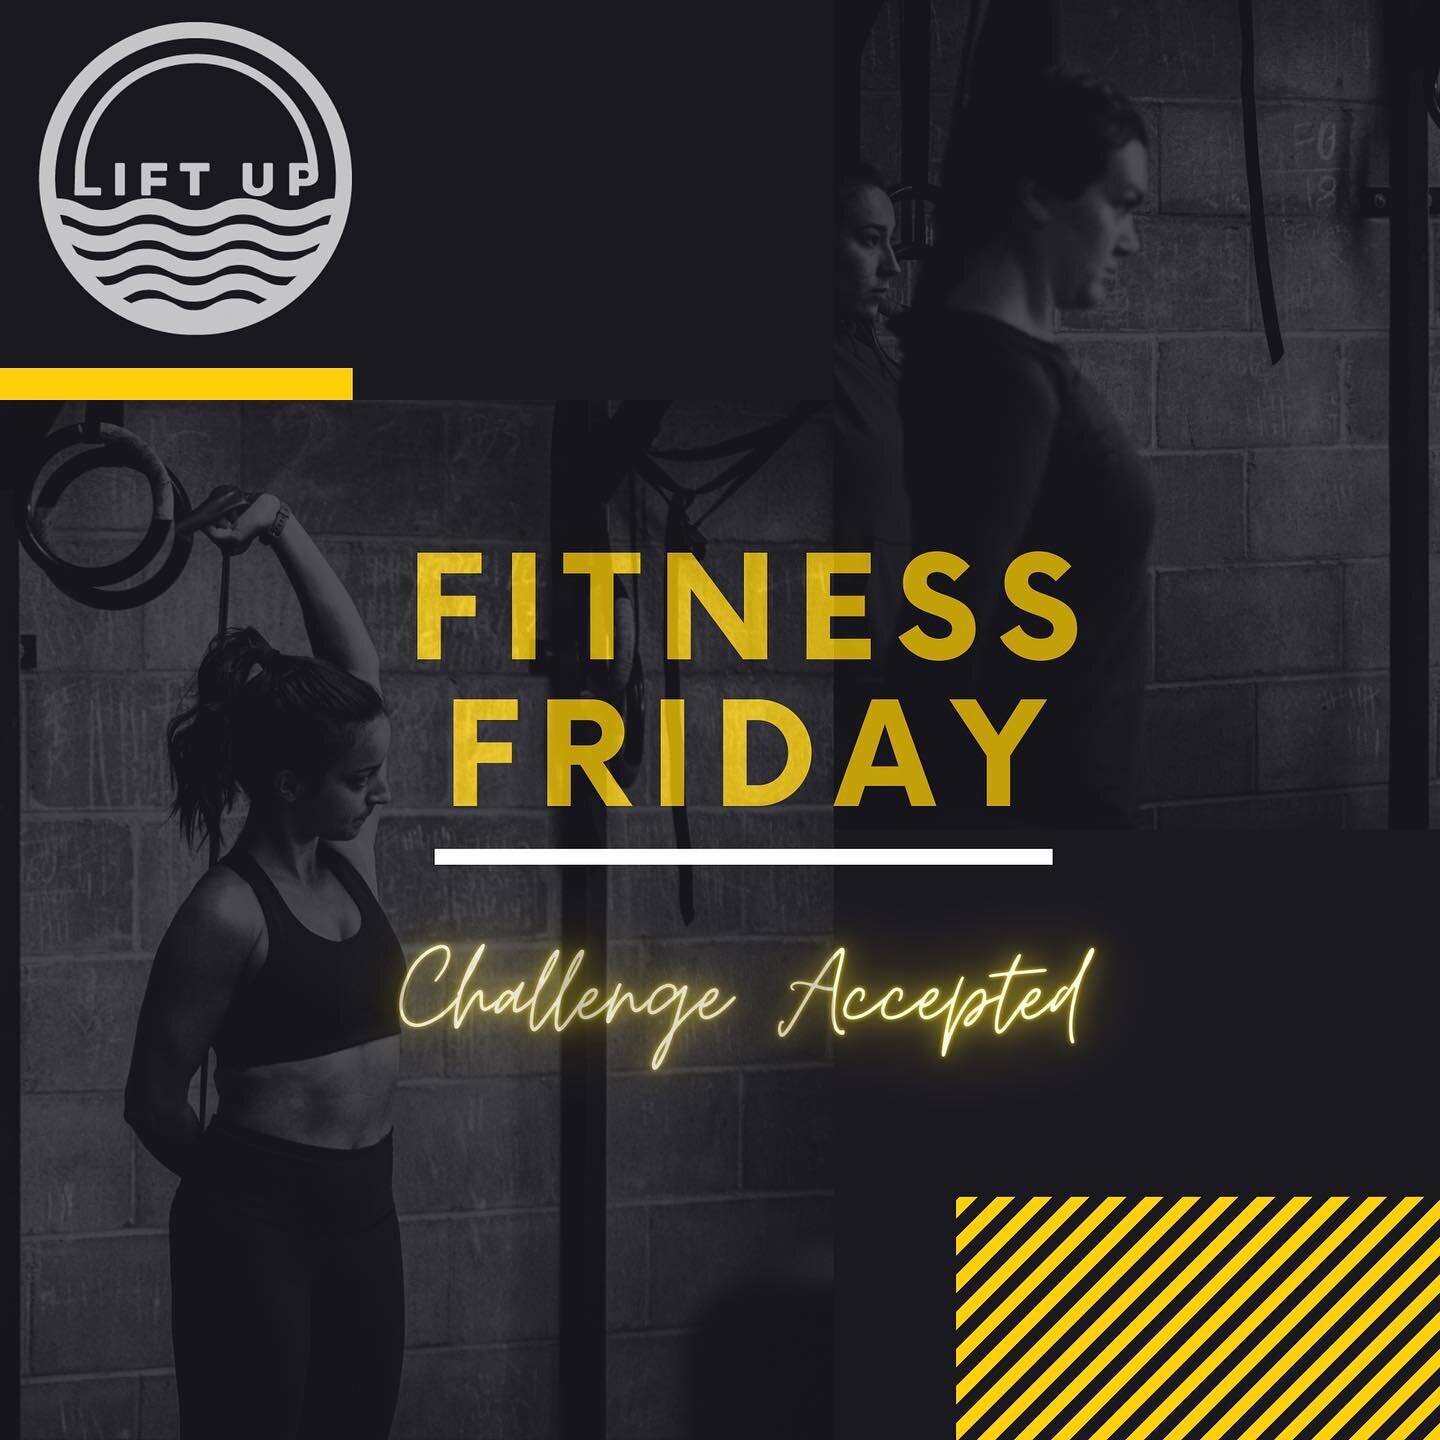 Happy #fitnessfriday Everyone!!! 🎉

Today&rsquo;s Lift Up #workout is another simple, yet challenging conditioning based program that can assist you in your #fitnessjourney 💪

🧎Warm Up :
▪️10 Child&rsquo;s Pose to Cobra
▪️5 Side Lying Hip Circles 